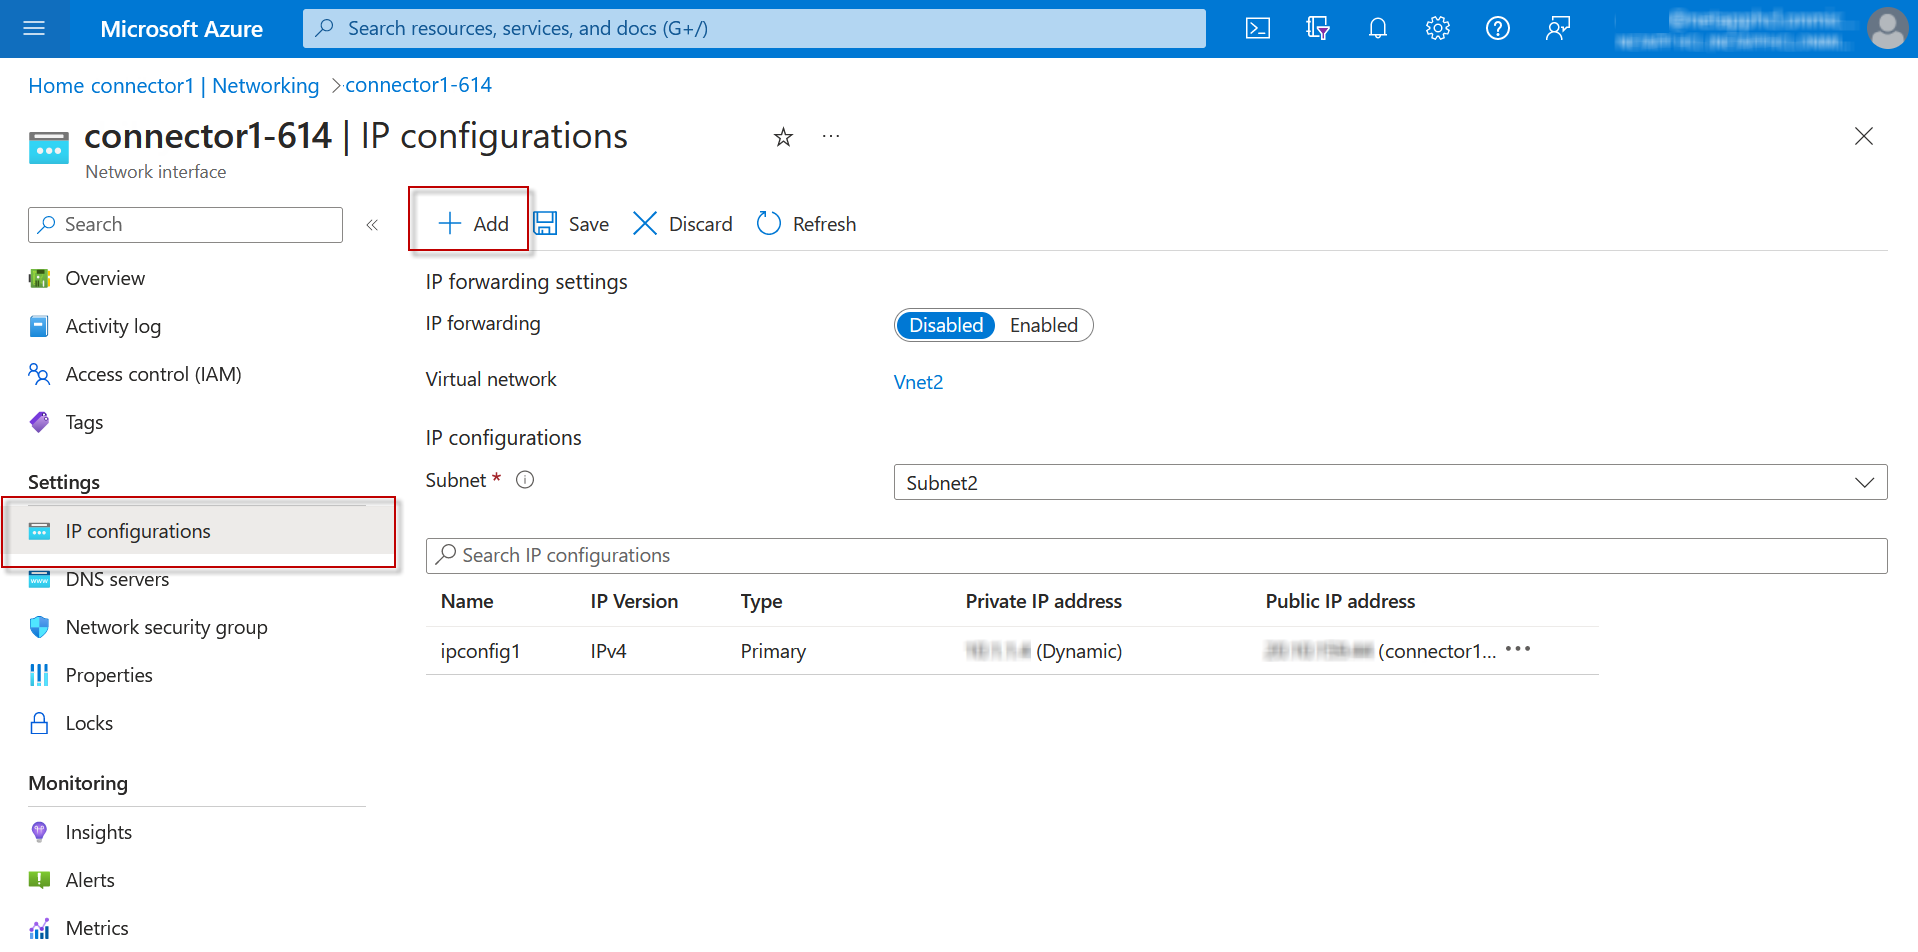 A screenshot of the IP configurations page in the Azure portal